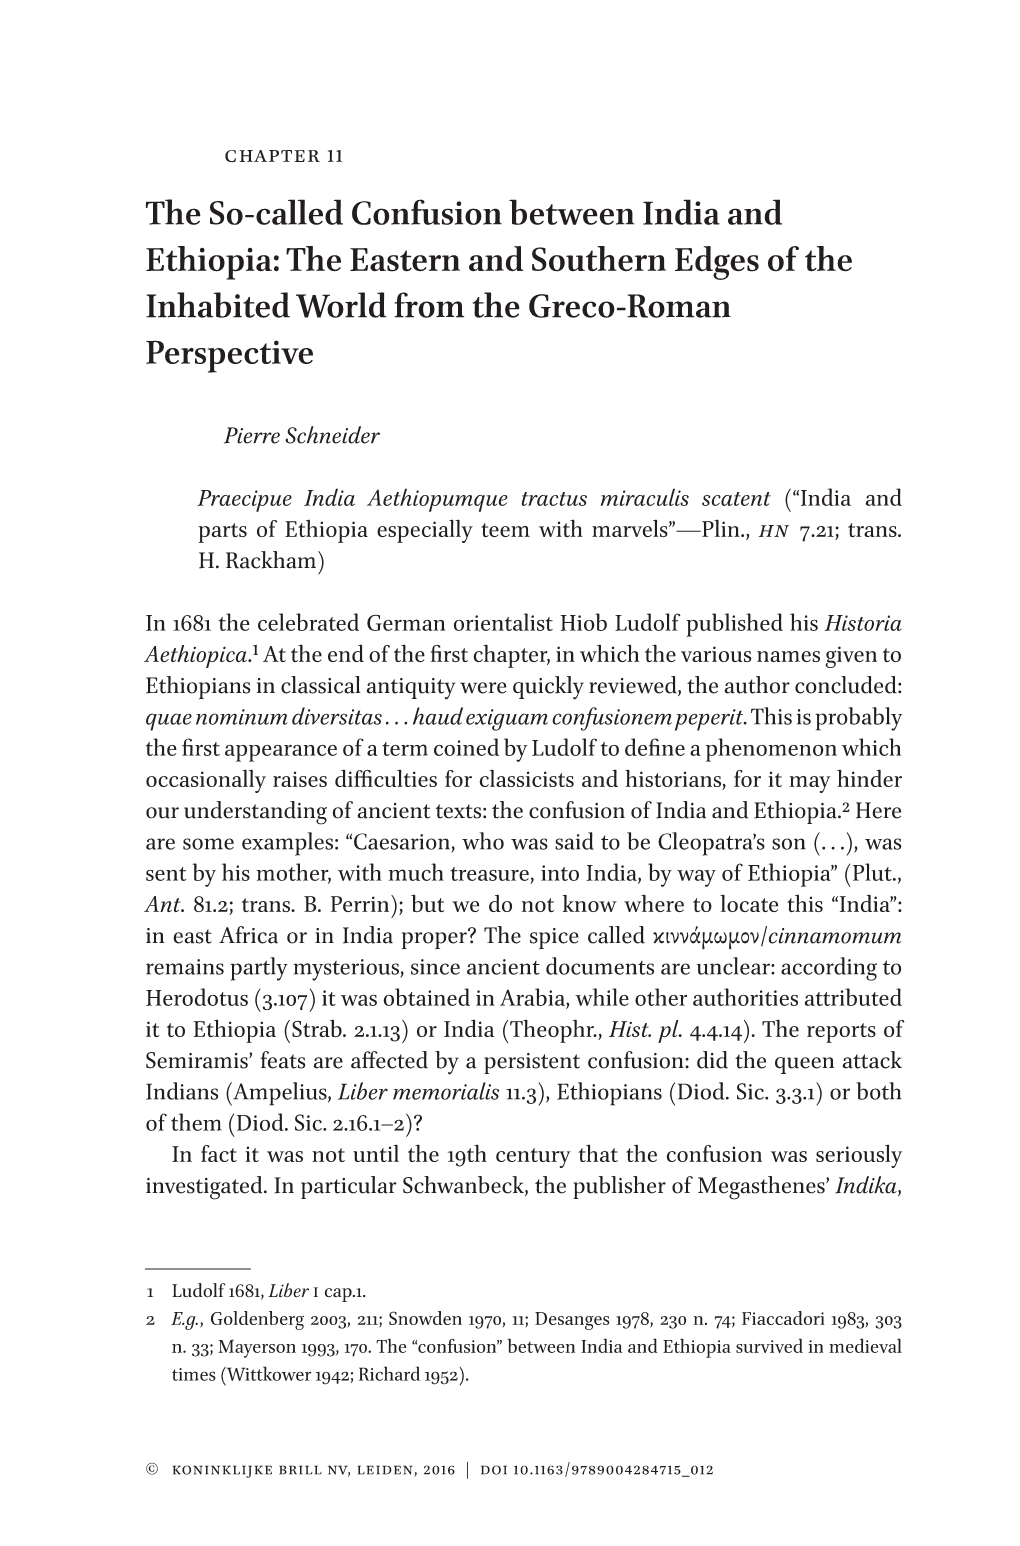 The So-Called Confusion Between India and Ethiopia: the Eastern and Southern Edges of the Inhabited World from the Greco-Roman Perspective